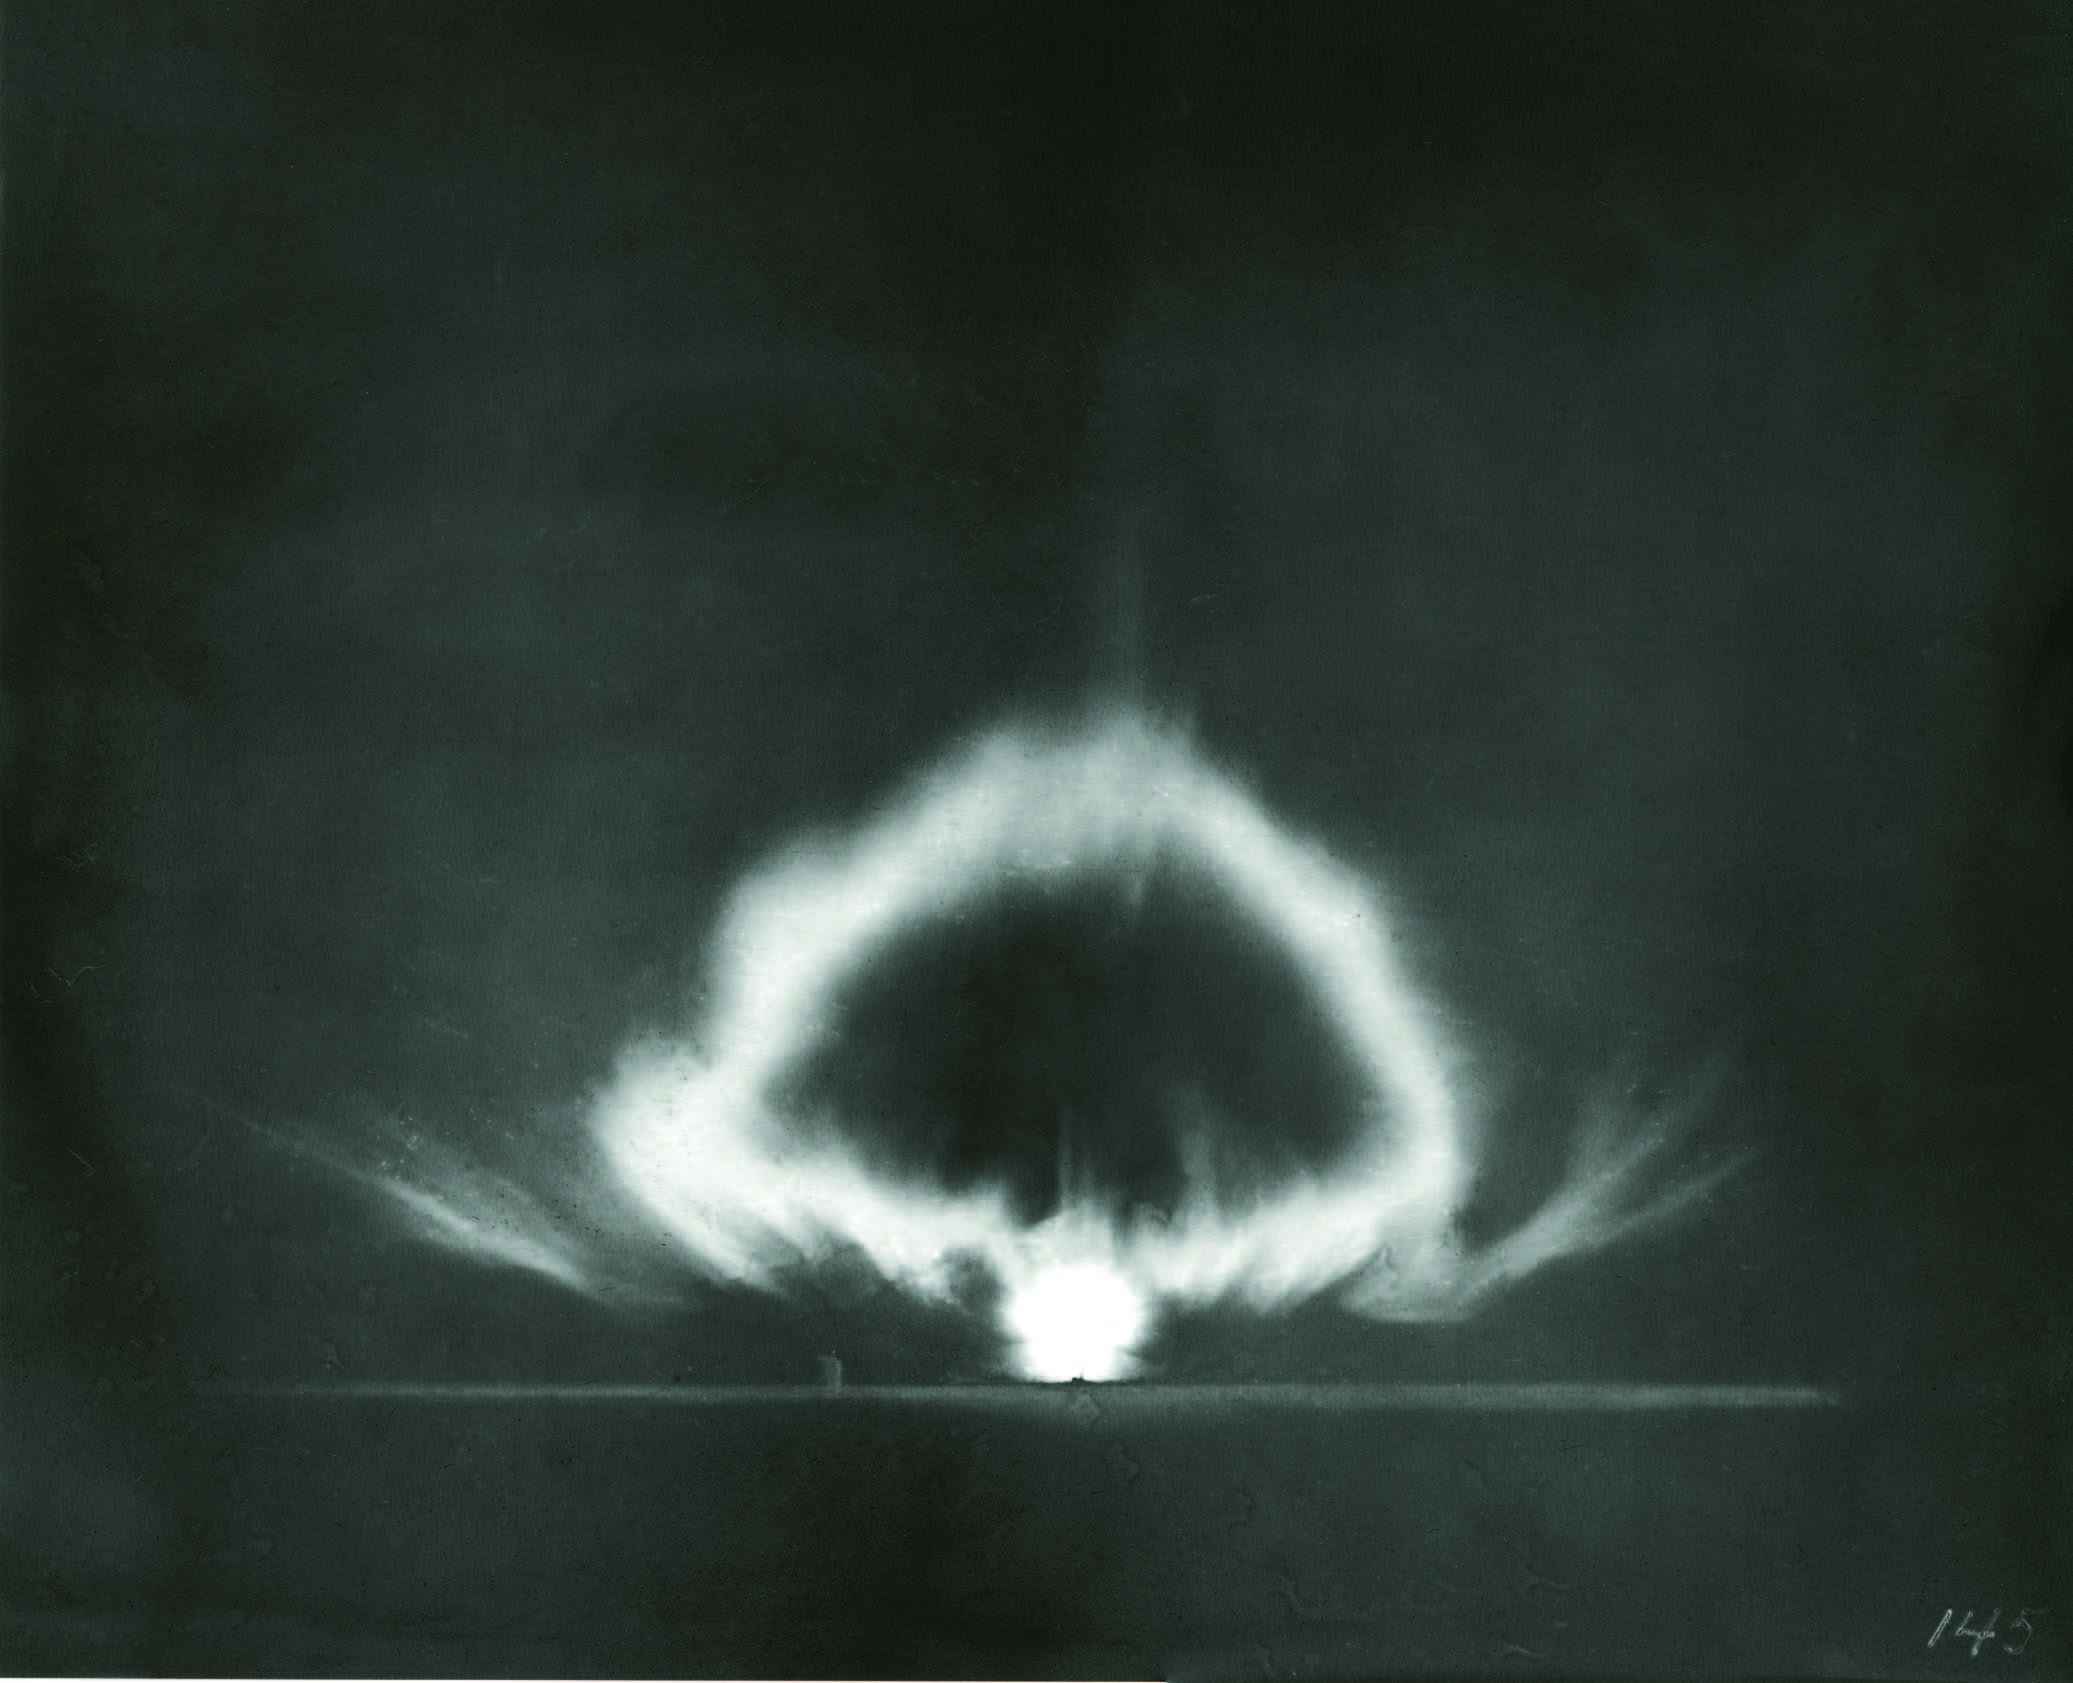 Julian Mack, Trinity Site Atomic Bomb Test, July 16, 1945. Pinhole photograph. Courtesy Los Alamos National Laboratories and the Palace of the Governors Photo Archives (NMHM/DCA), Pinhole Resource Collection, Neg. No. HP.2012.15.775.